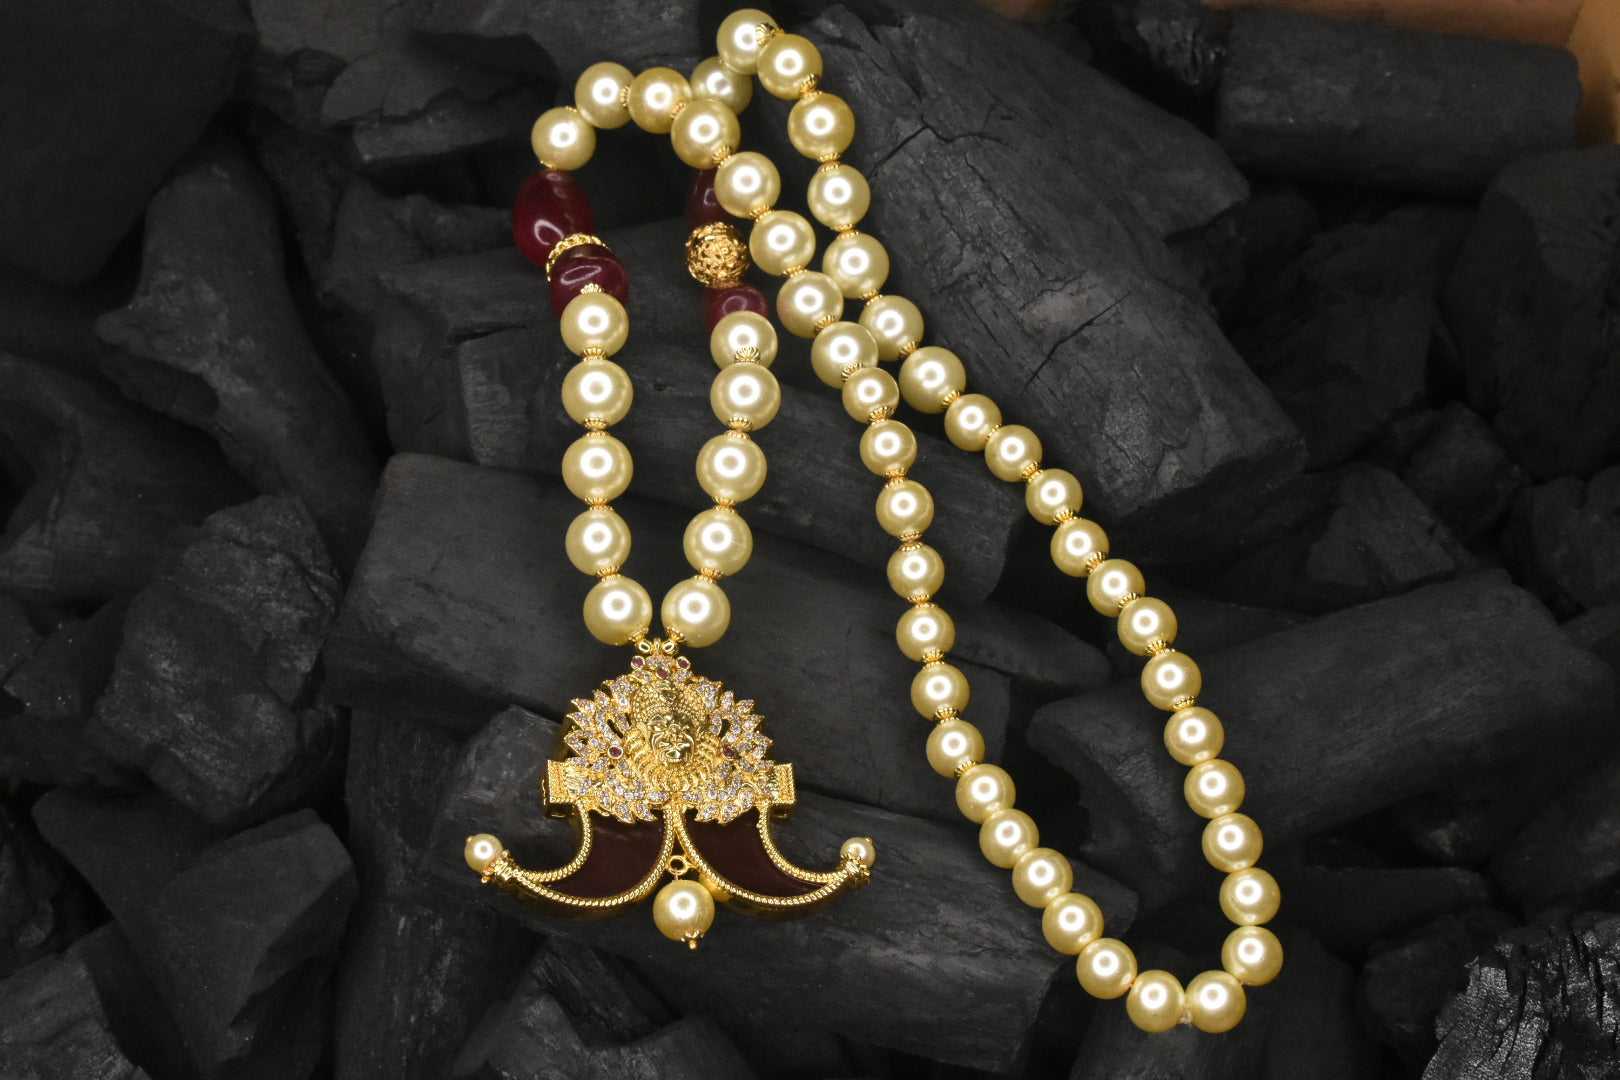 One Gram Gold Puligoru Pendent For Groom